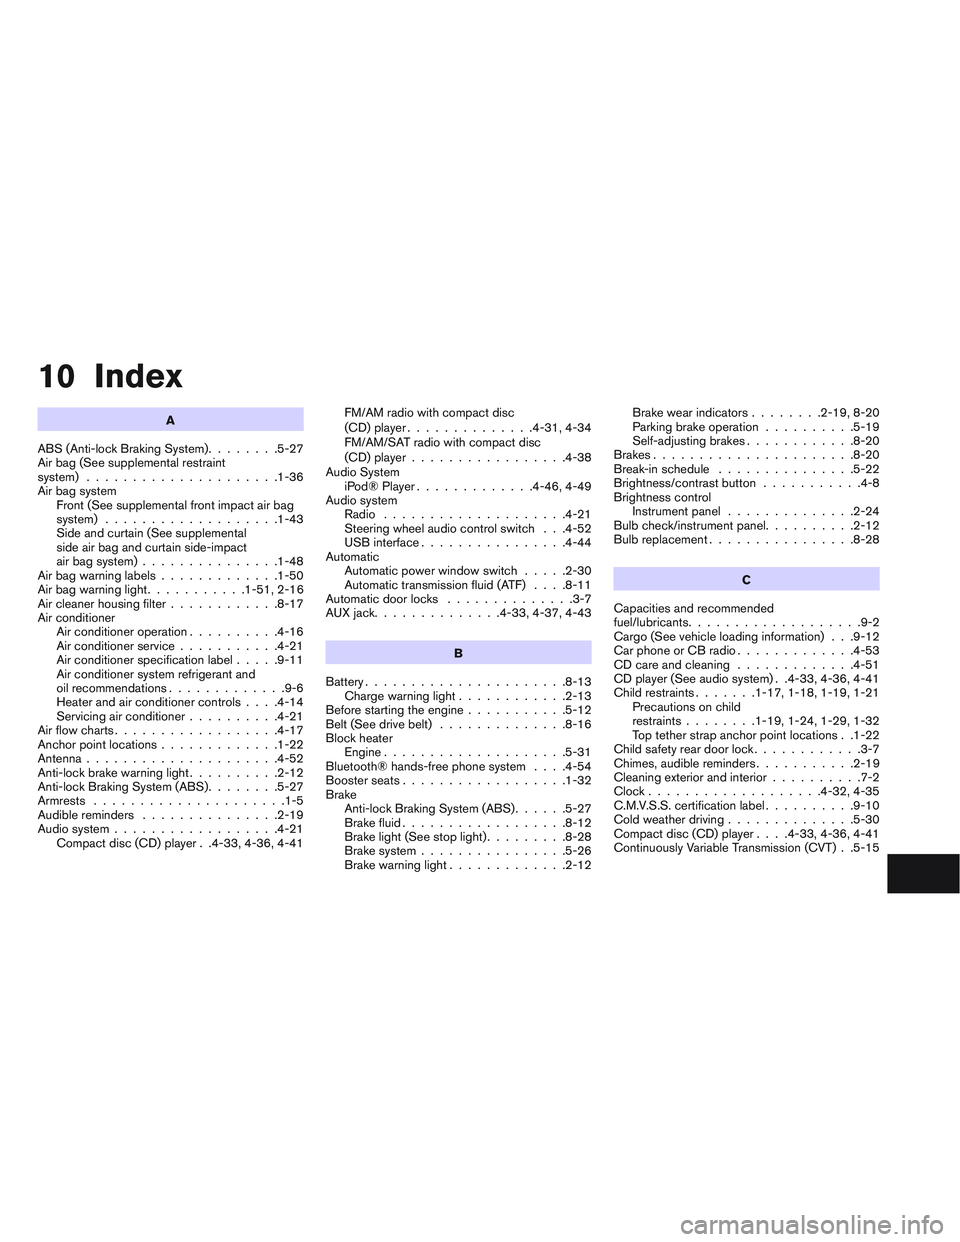 NISSAN VERSA 2013  Owners Manual 10 Index
A
ABS (Anti-lock Braking System) ........5-27
Air bag (See supplemental restraint
system) .....................1-36
Air bag system Front (See supplemental front impact air bag
system) .......